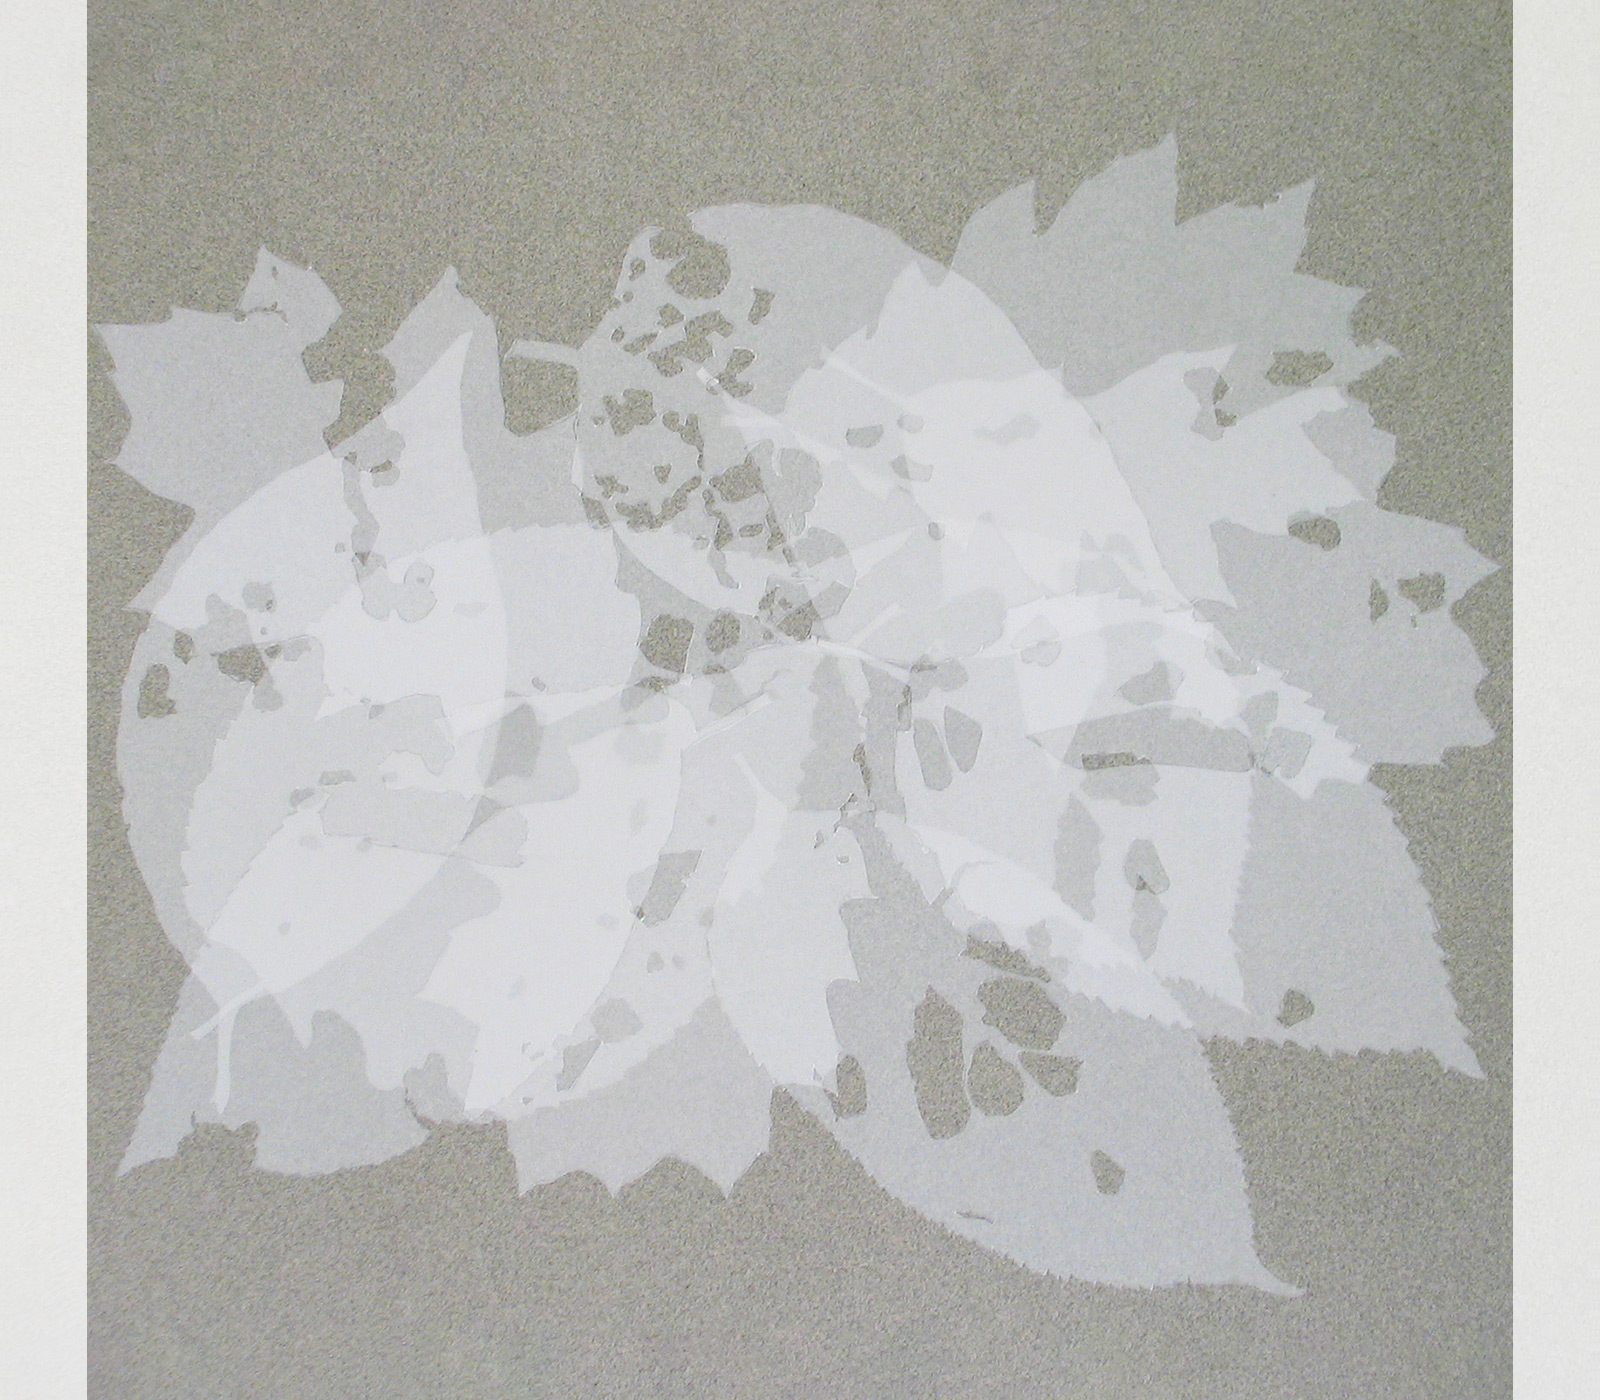 Ghost Leaves. Cut vellum on paper. 2010.